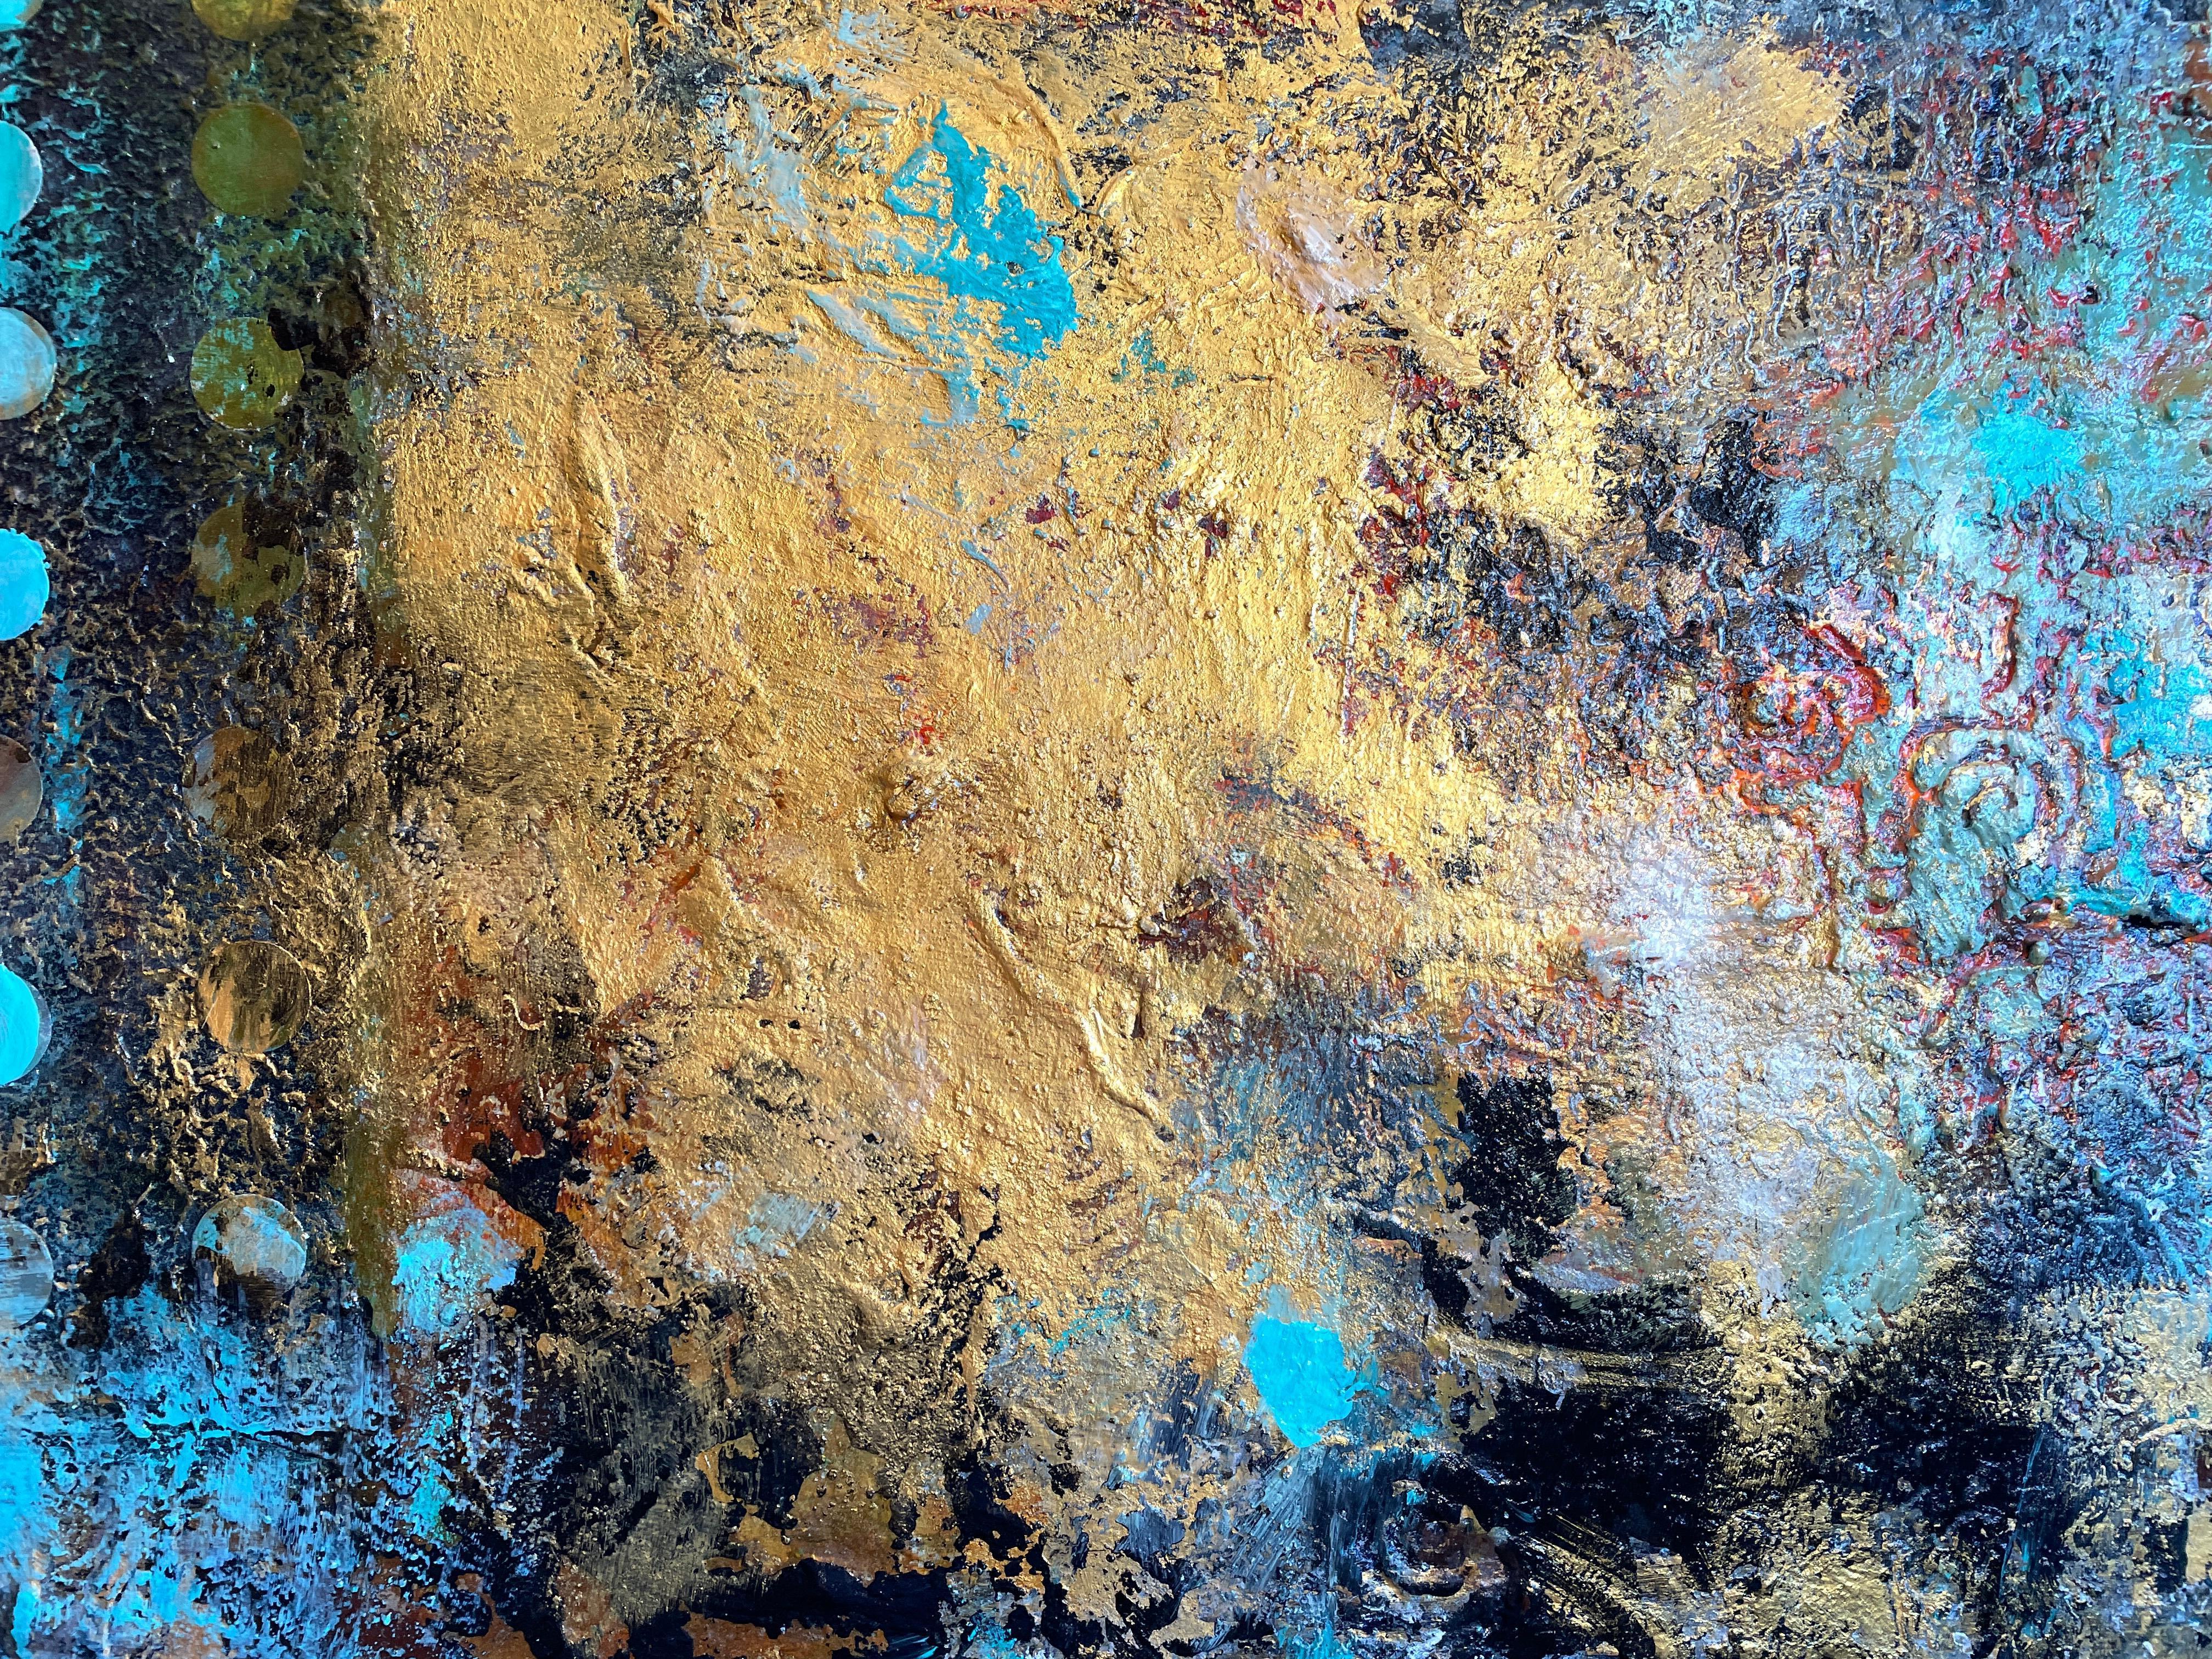 'Full Circle' by Mary Titus - Vibrant Teal and Gold Abstract Expressionist 2